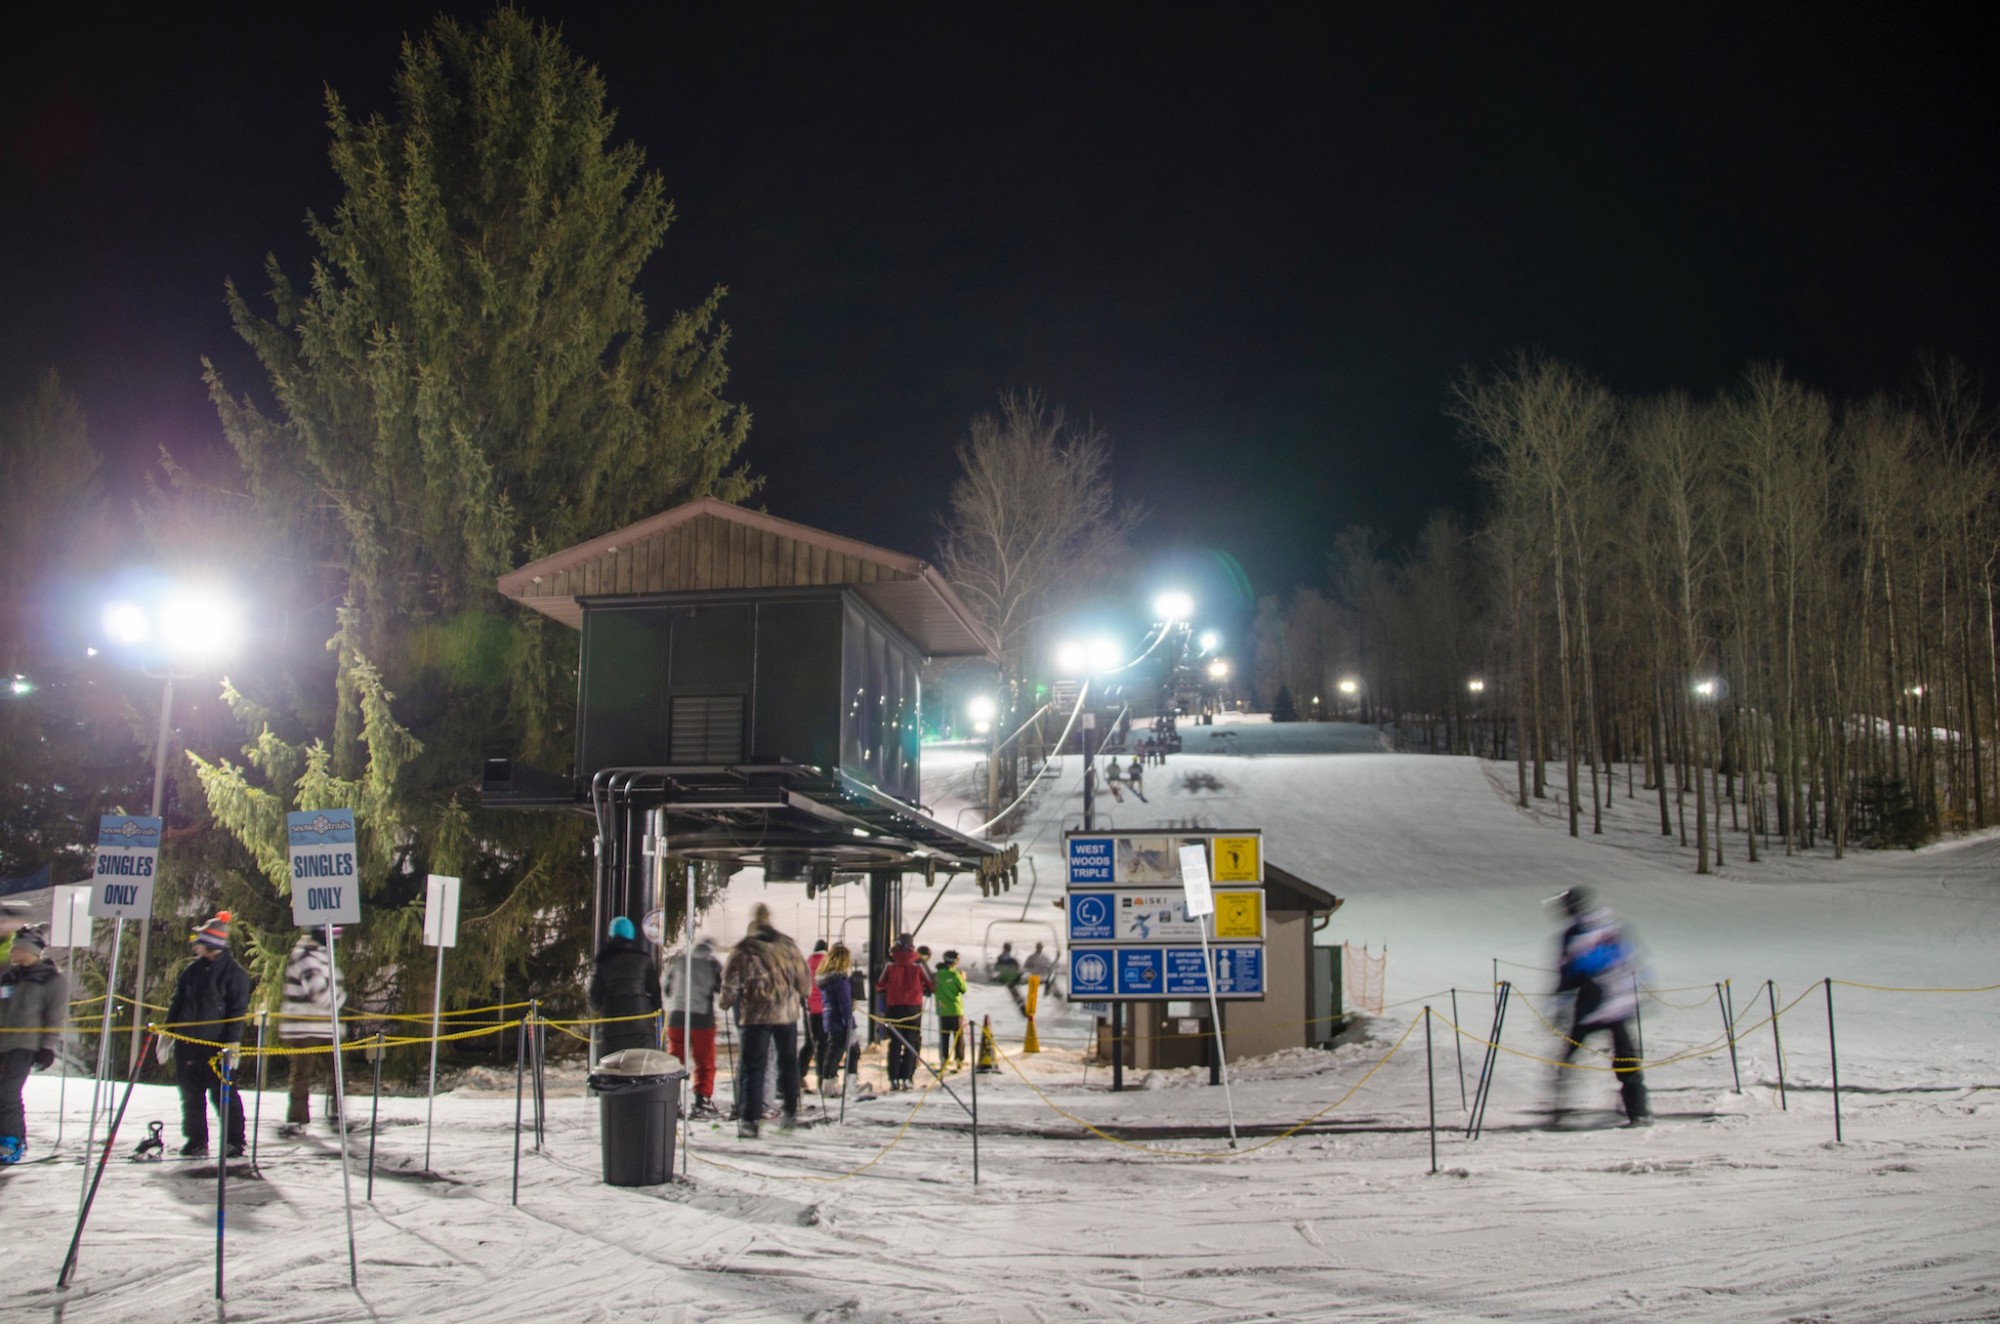 Late Night skiing at Snow Trails